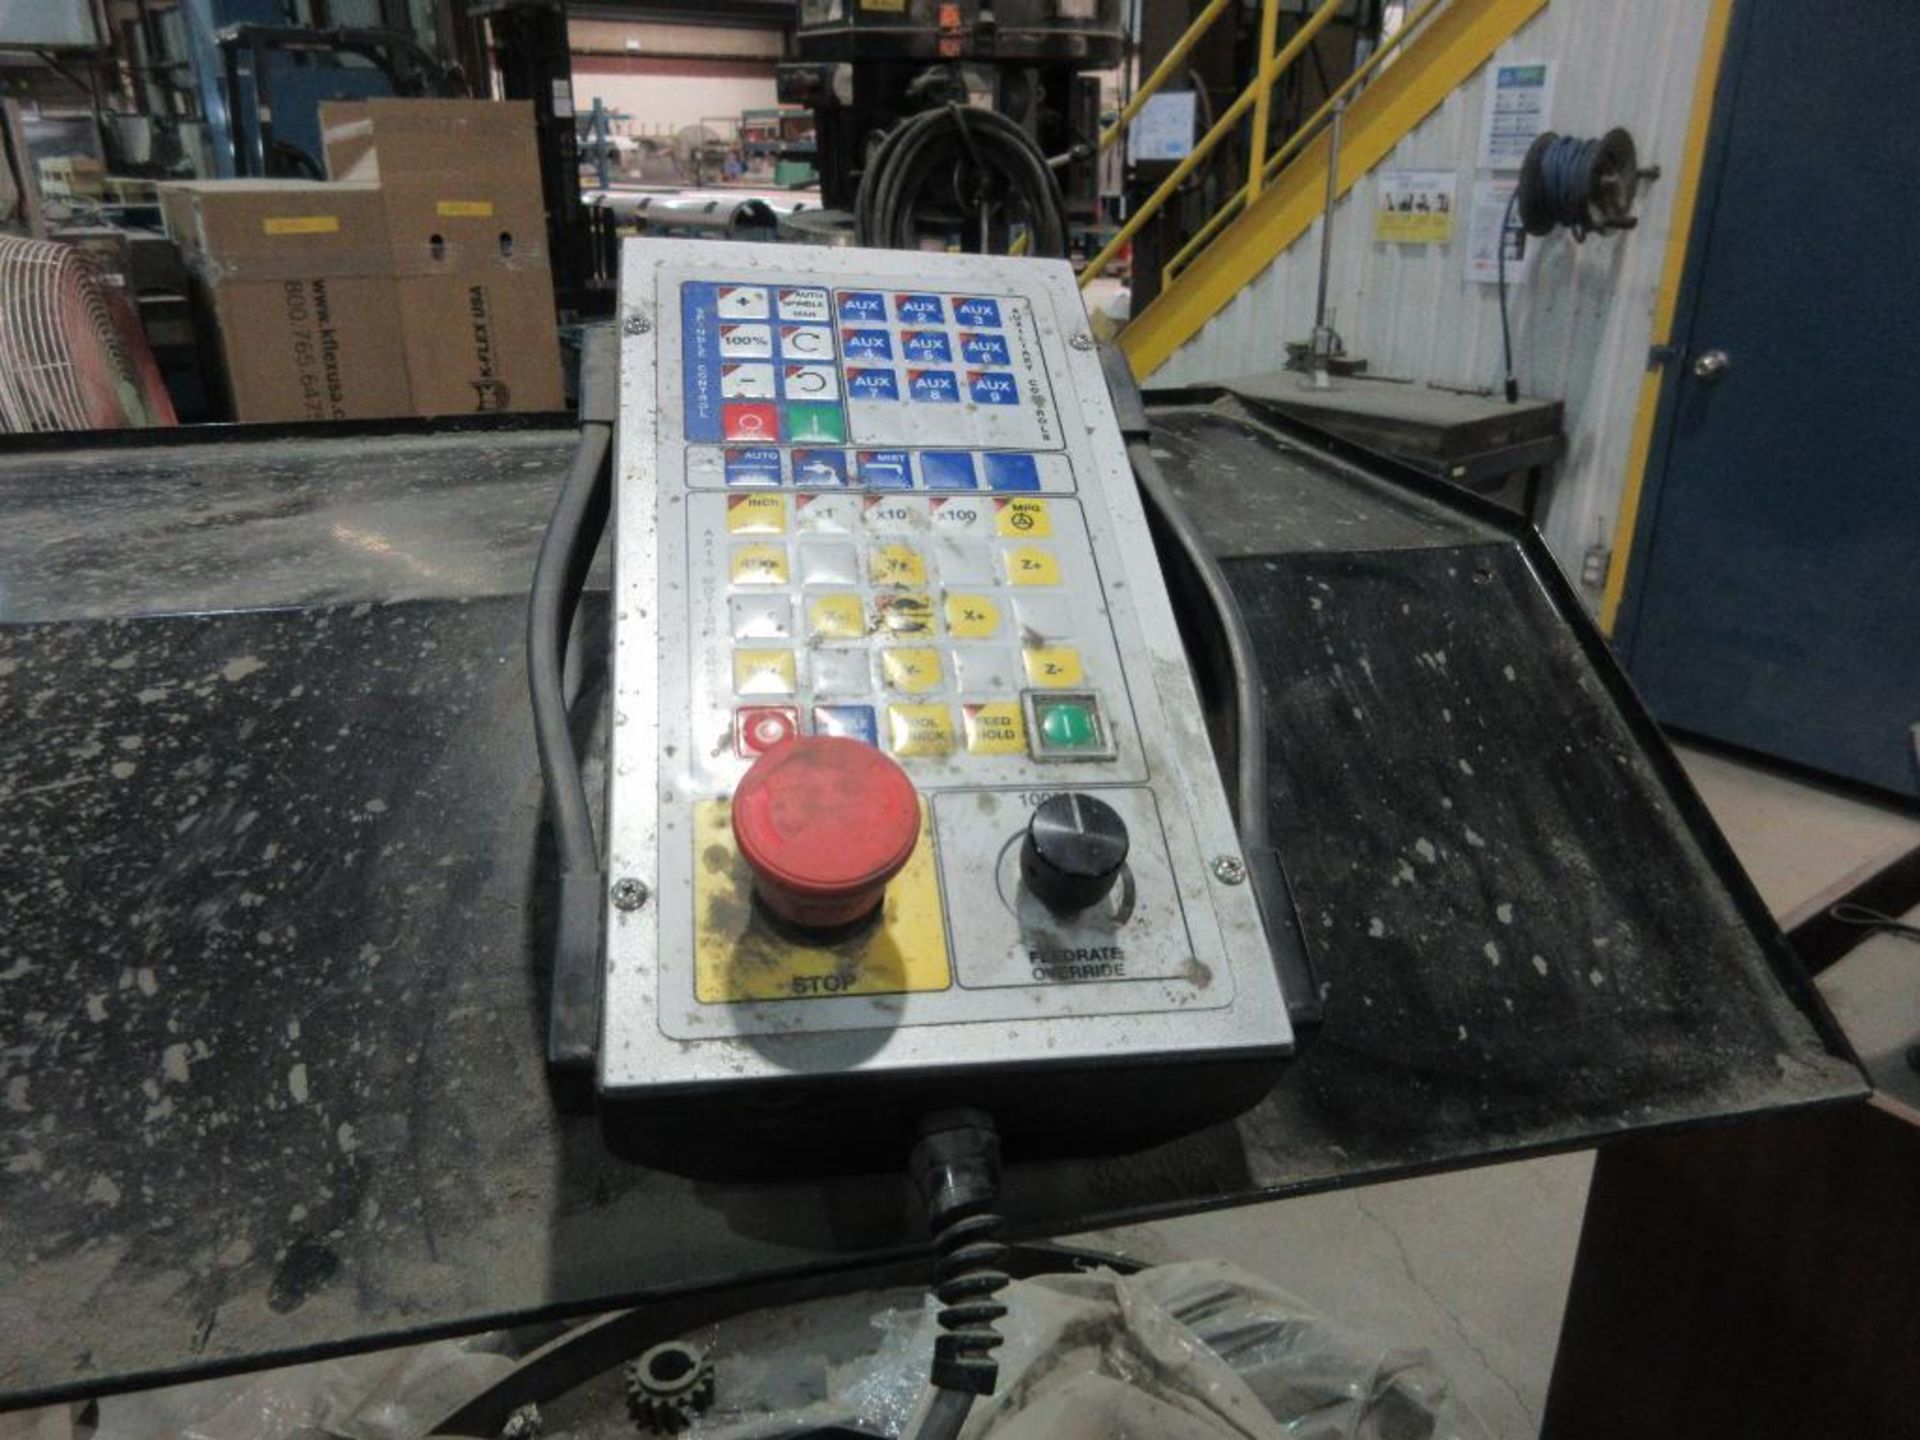 KBC CNC MILL, 30VS, S/N 331250, 127MM X 26MM TABLE, PENDANT DIGITAL CNC CONTROLLER 500 TO 4200 RPM [ - Image 4 of 5